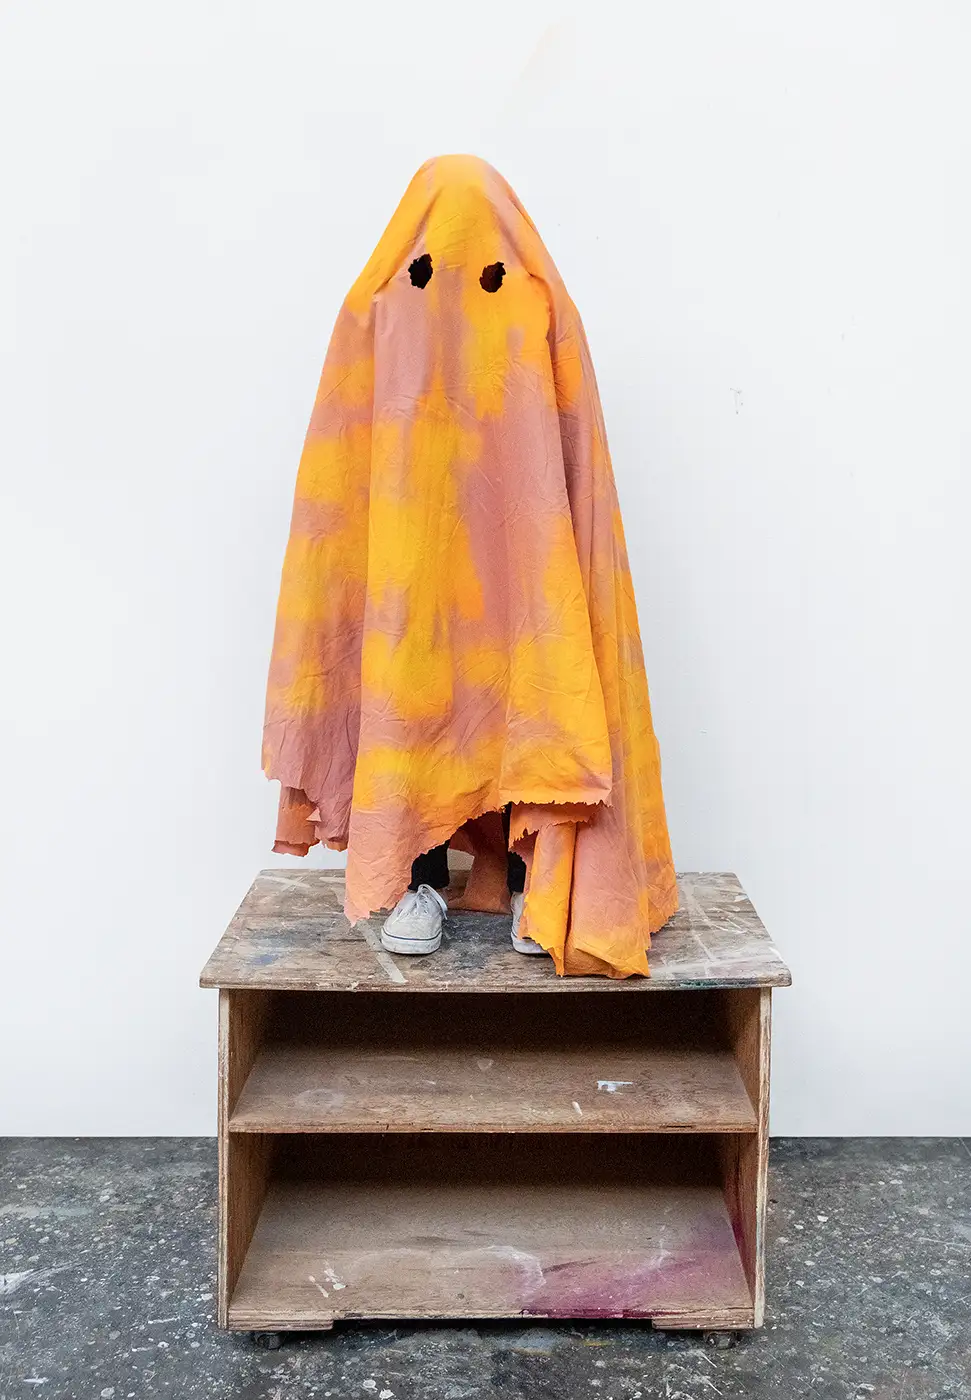  carlos charlie perez, artist, ghost(mikel), silicone rubber bed sheet denim wood contemporary artwork